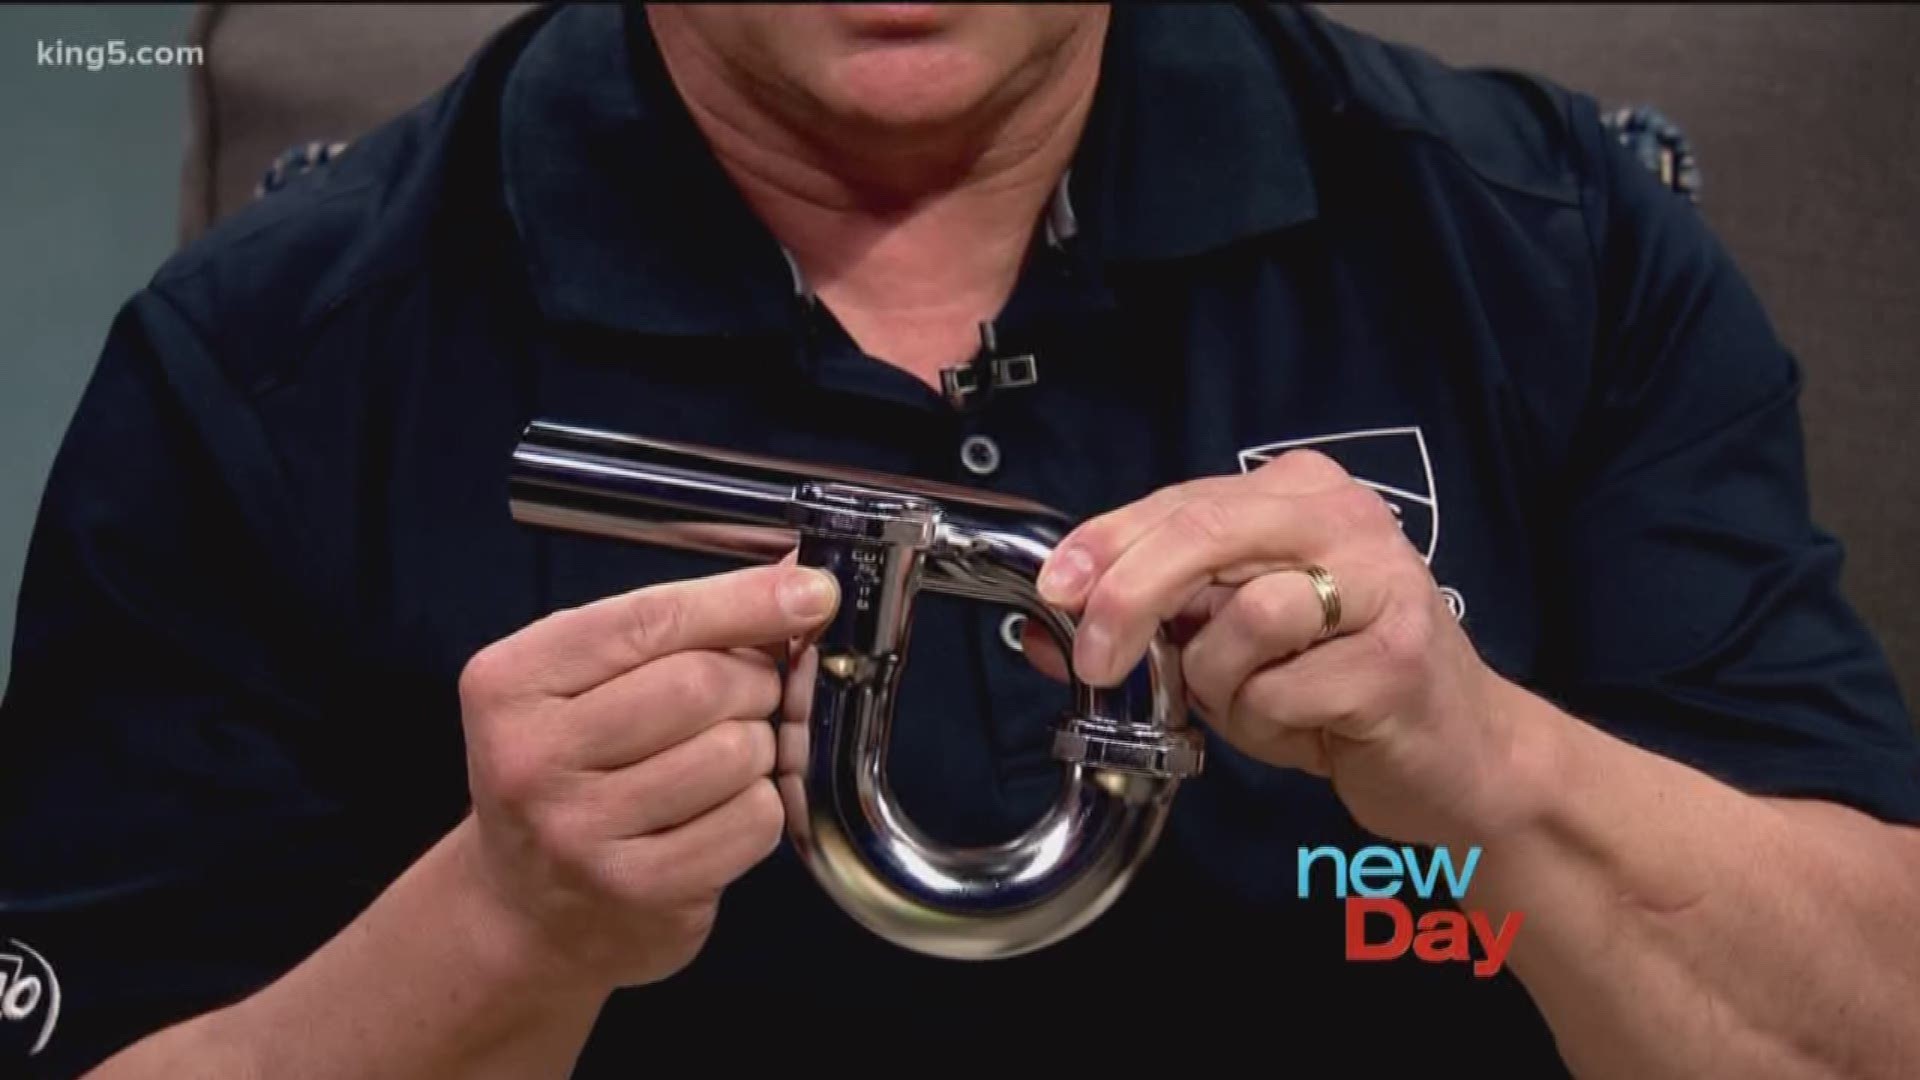 Today on New Day we learn how important it is to check for a plumber's certification. 